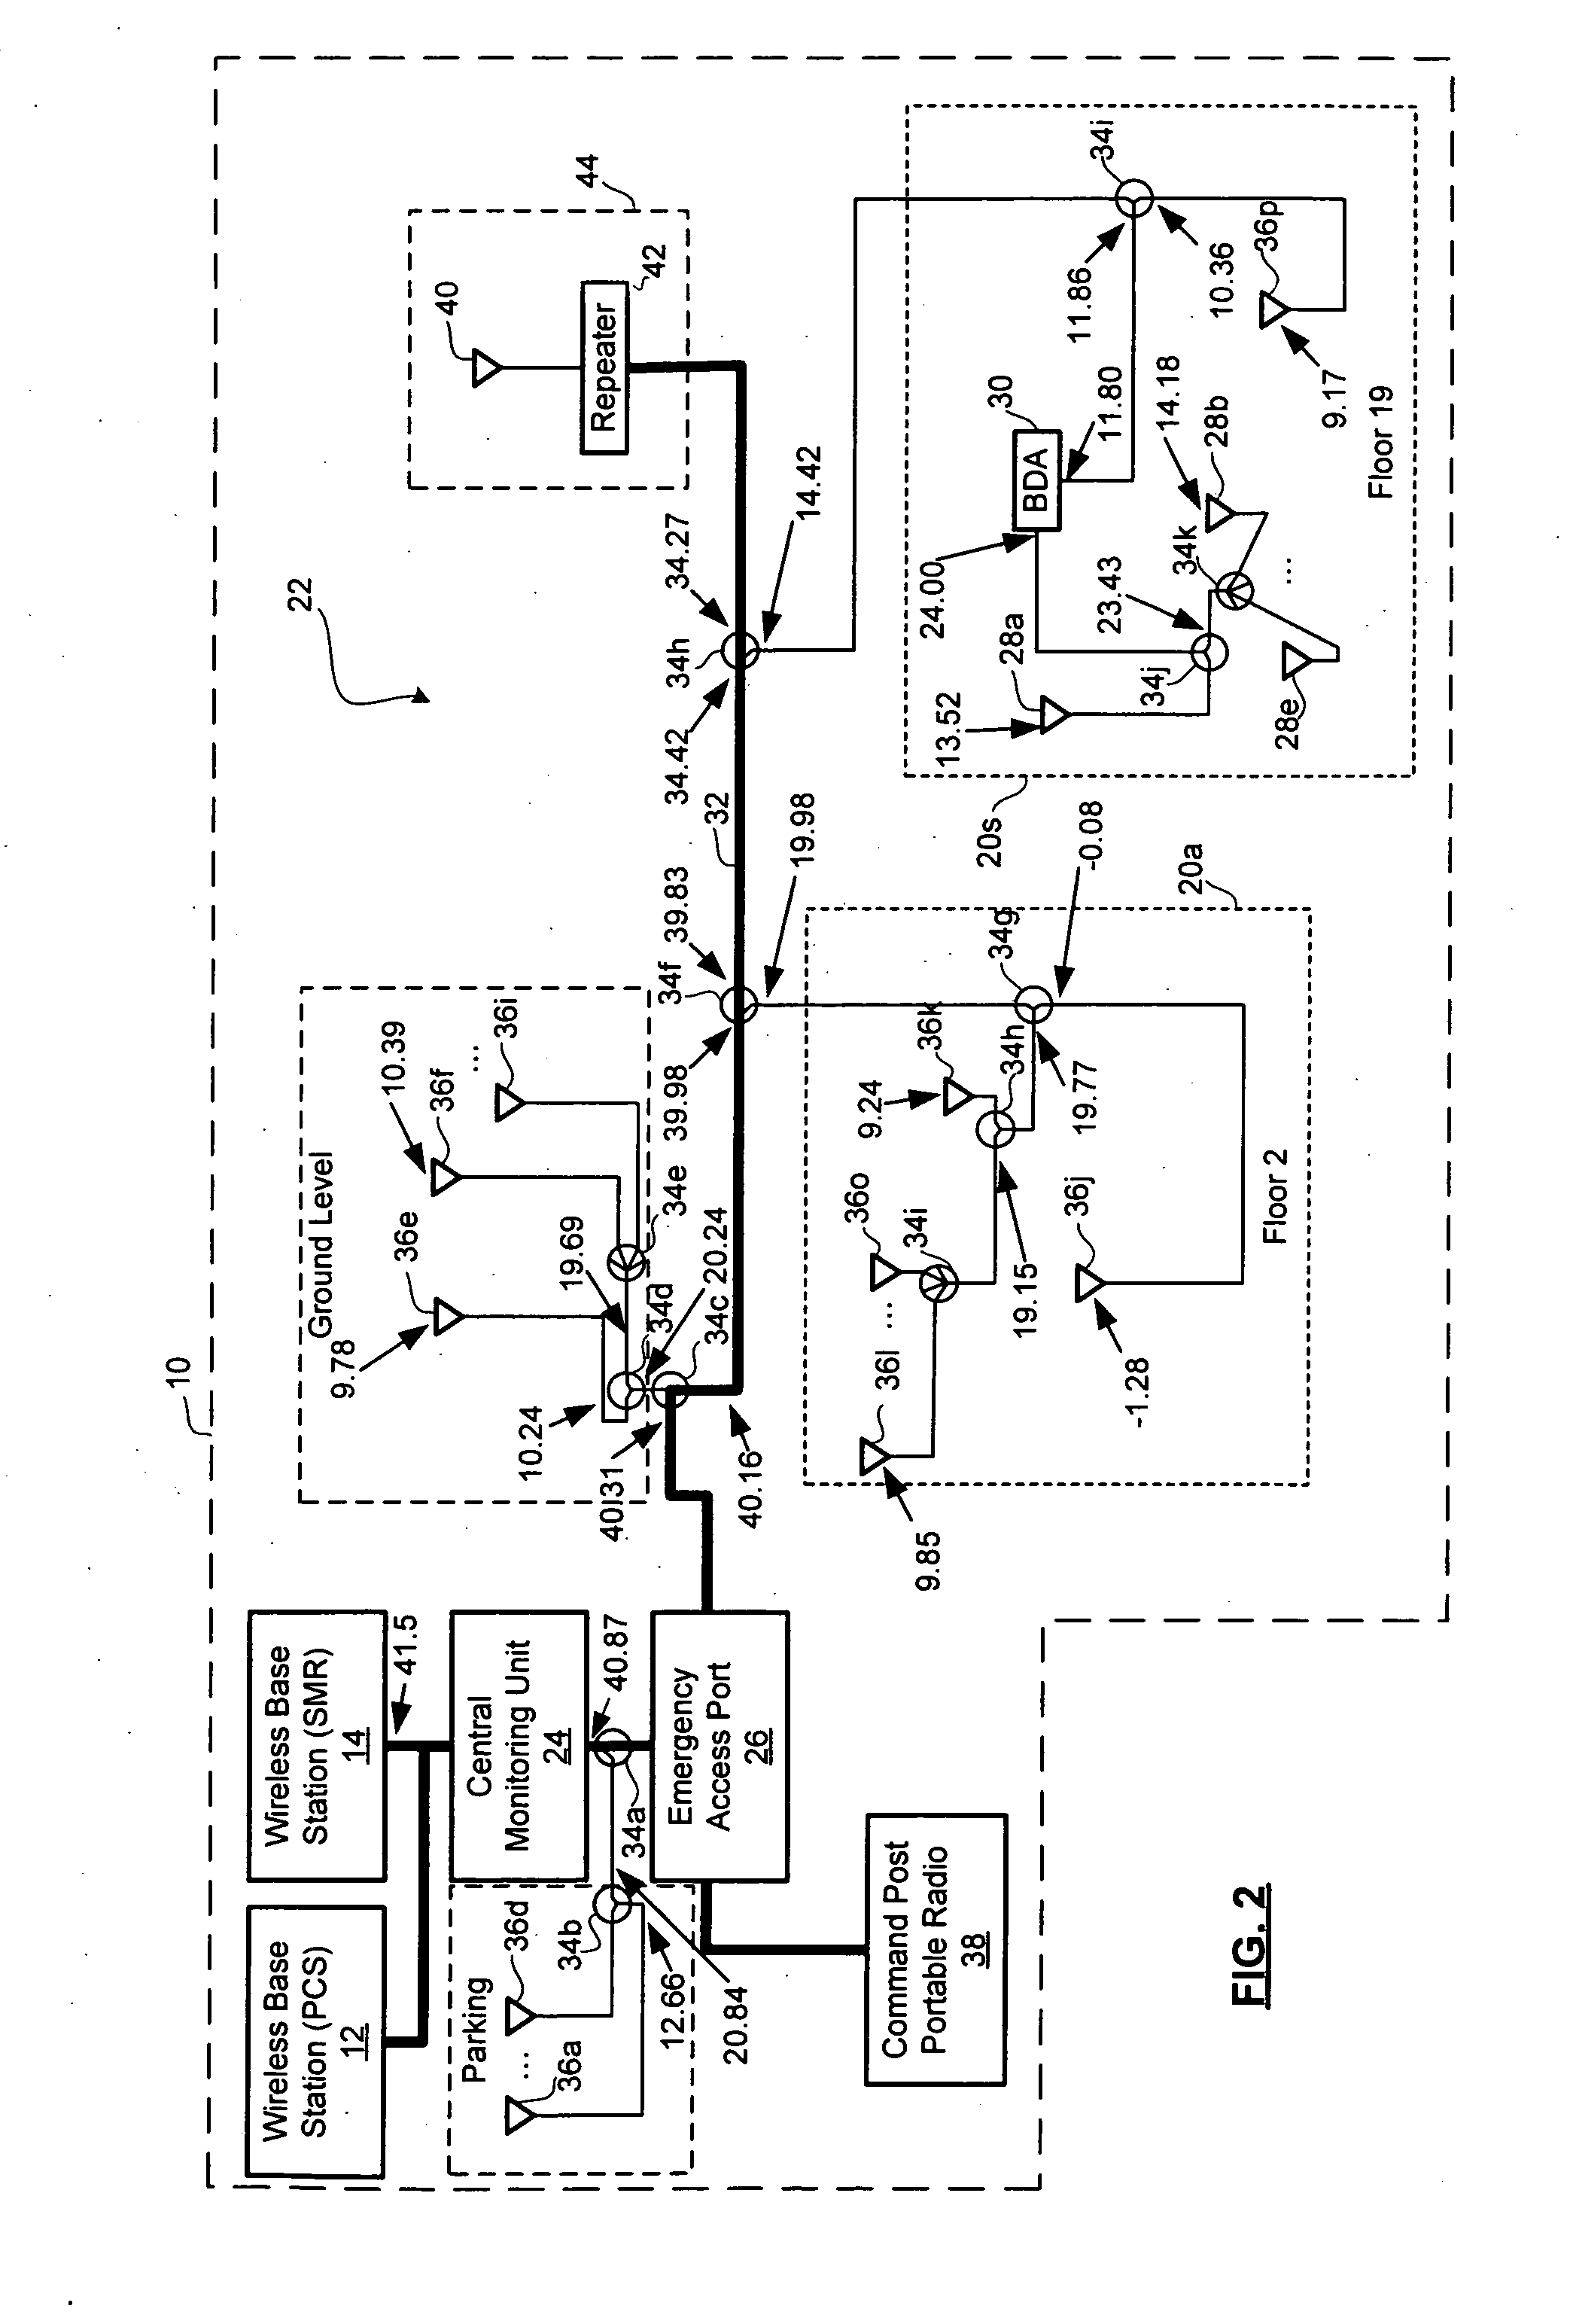 In-building wireless enhancement system for high-rise with emergency backup mode of operation